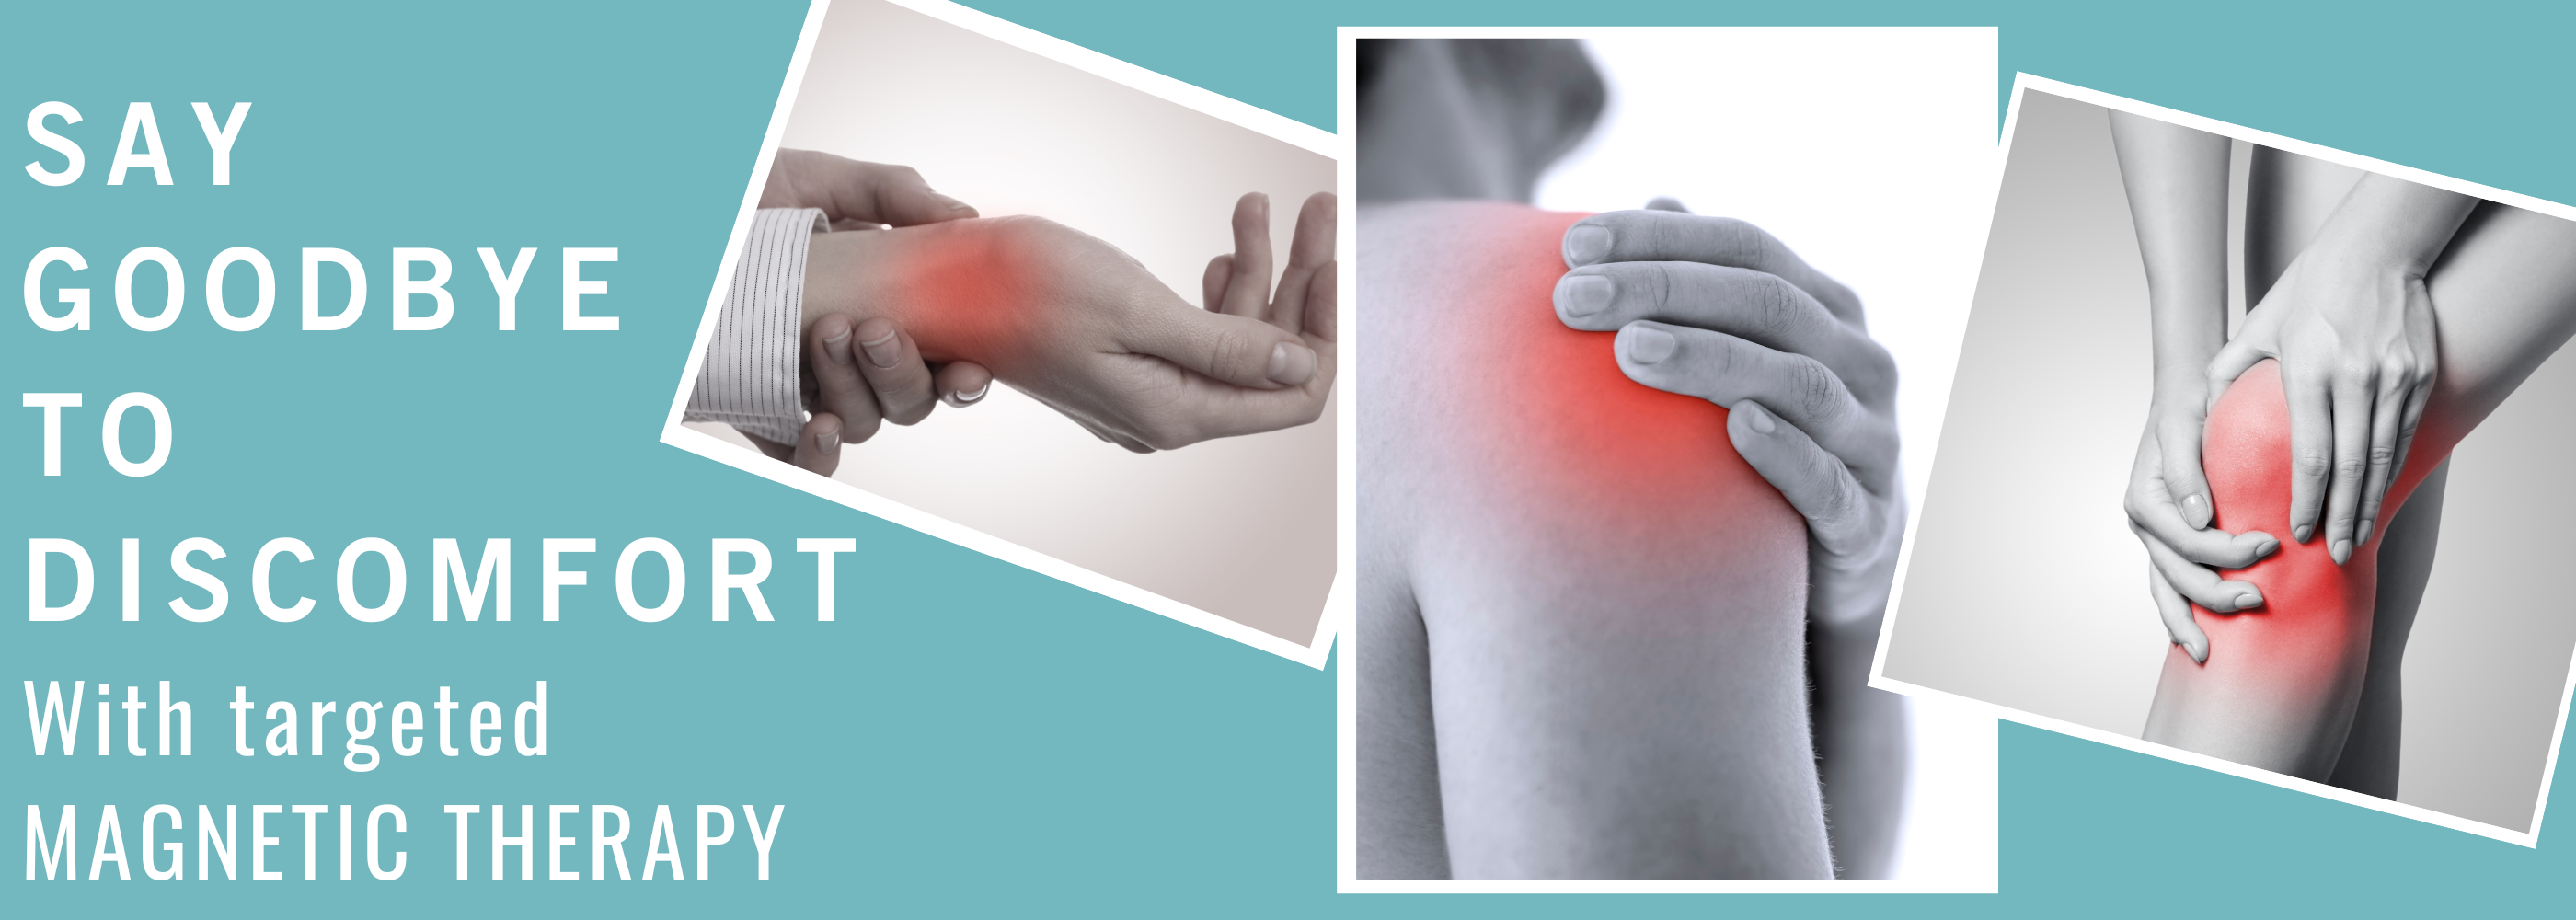 magnetic therapy for joint pain relief